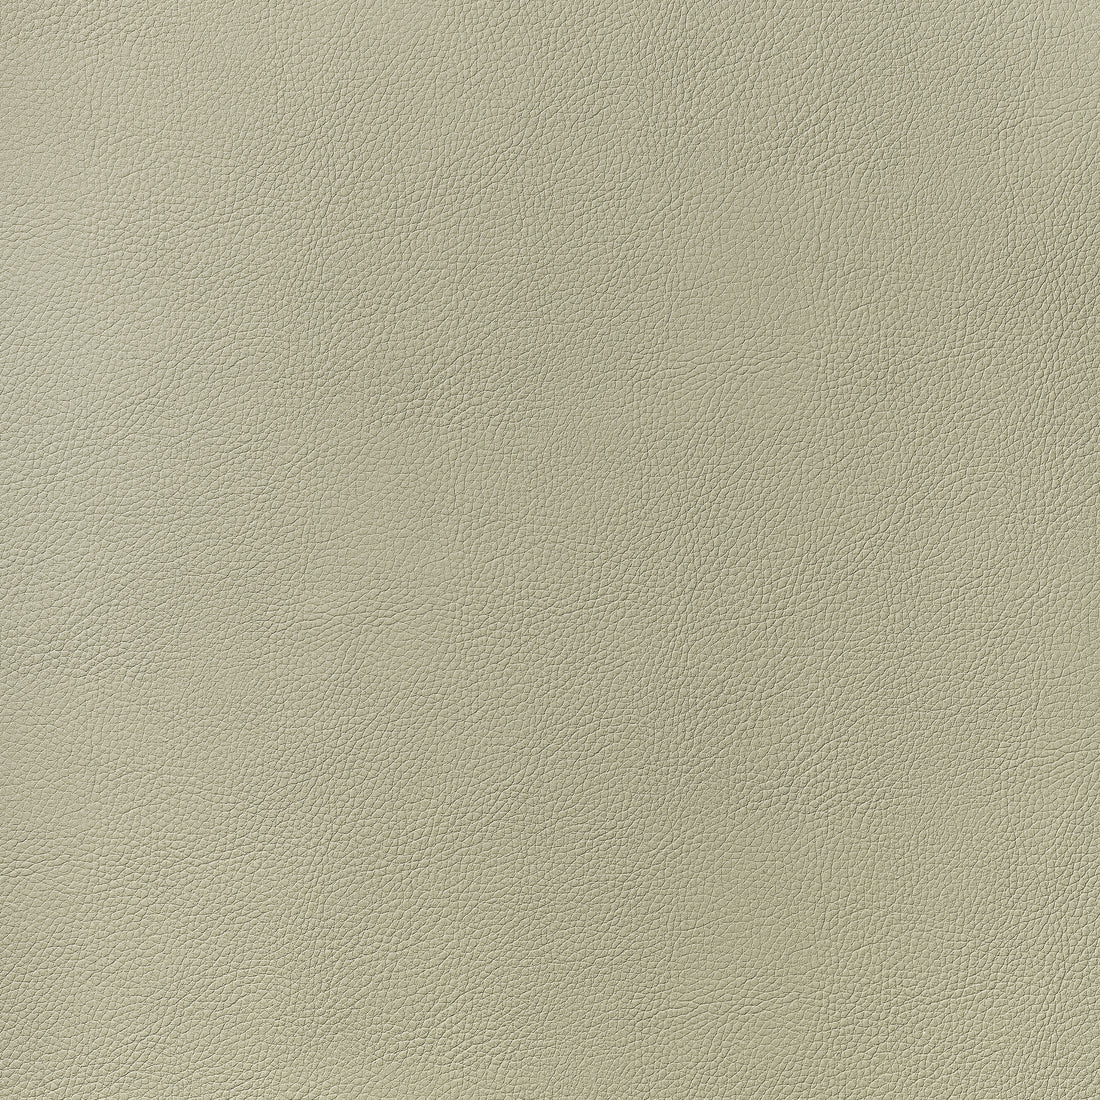 Arcata fabric in oat color - pattern number W78386 - by Thibaut in the  Sierra collection